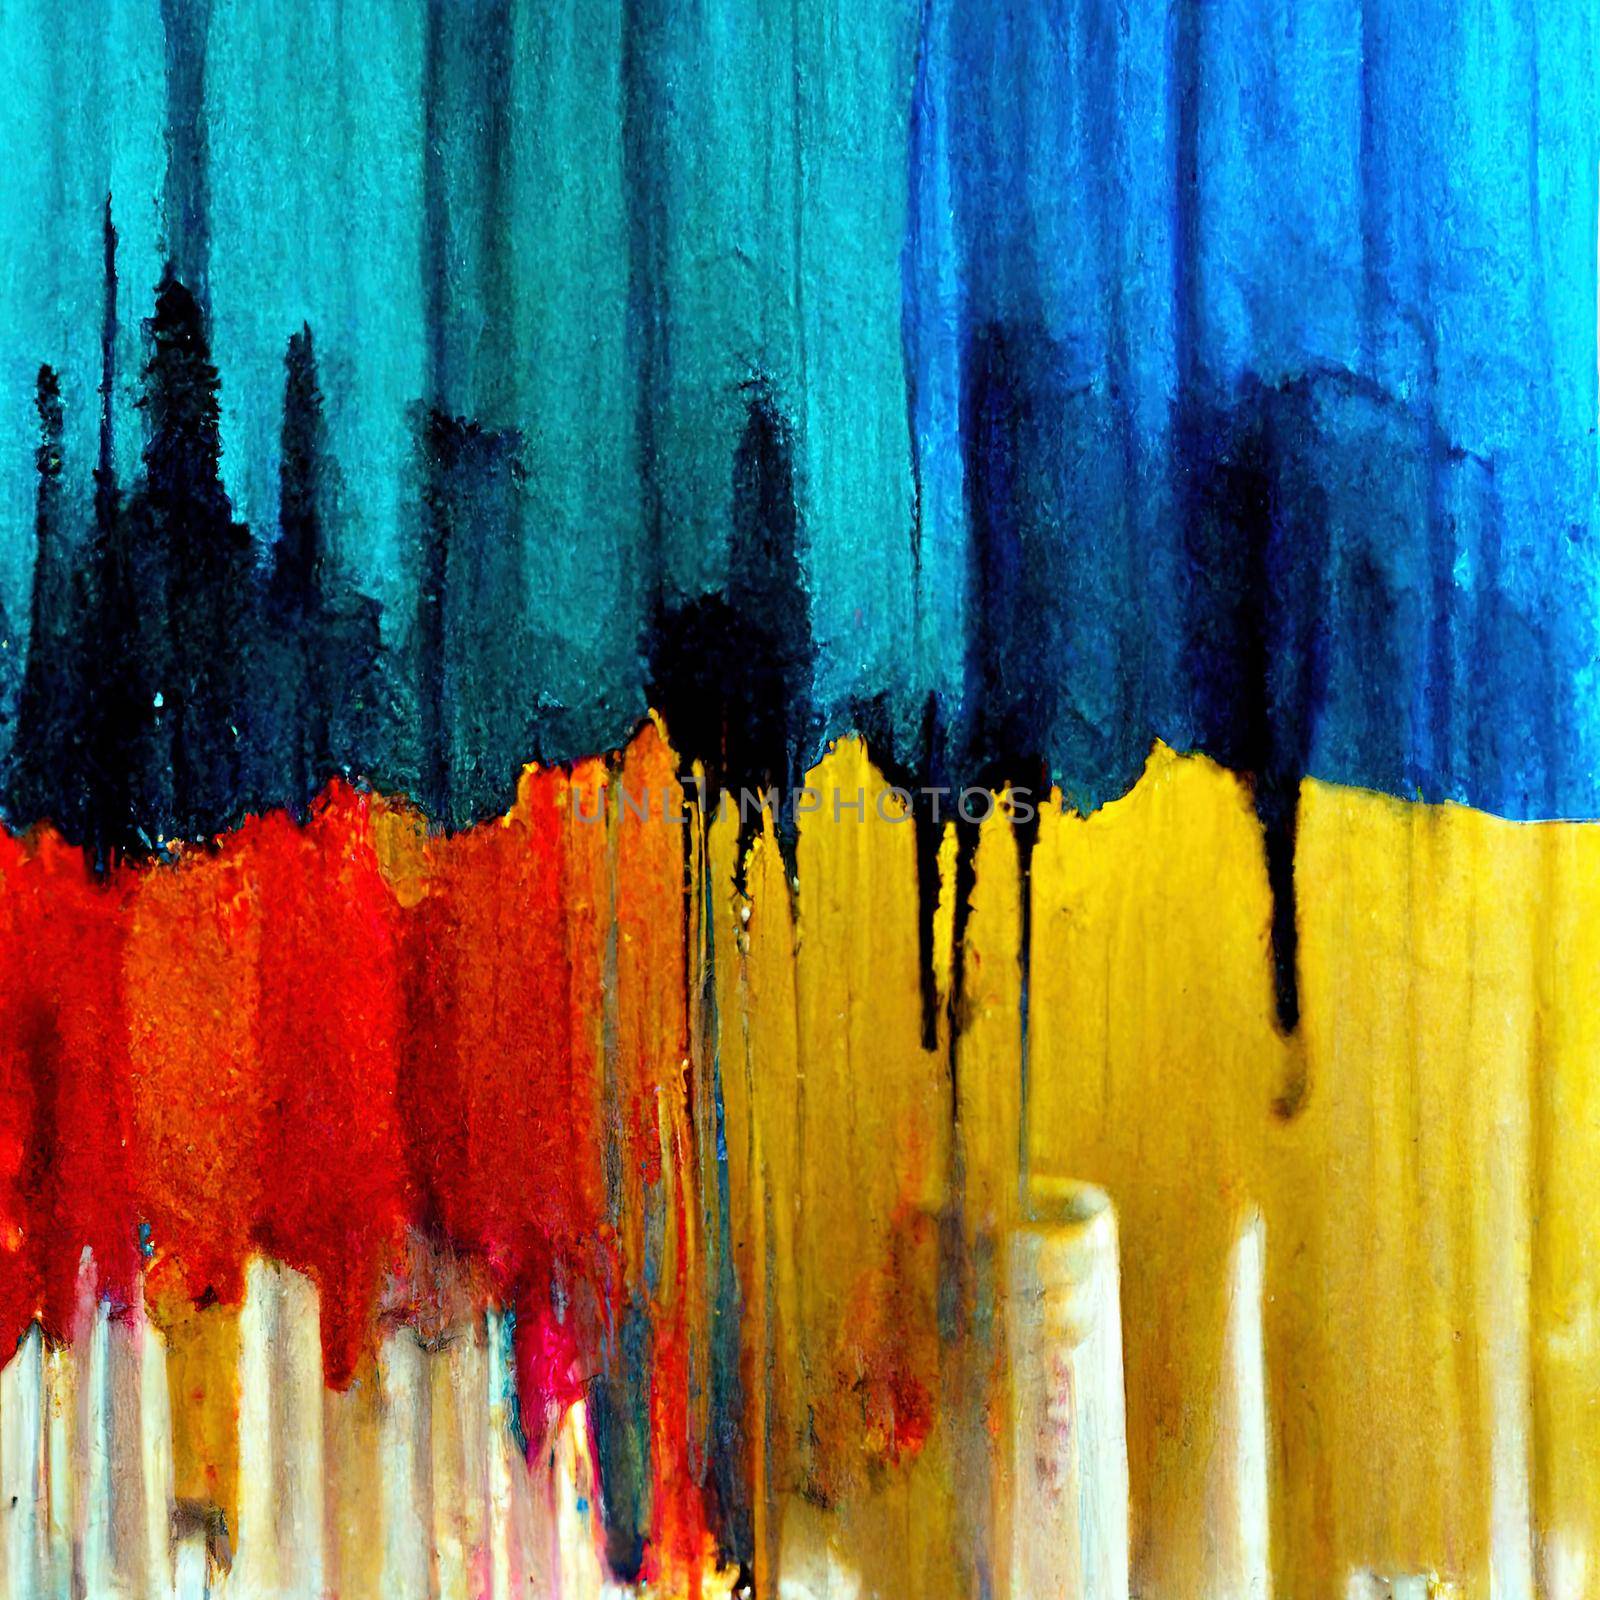 Ink paint. Closeup of the painting. Colorful abstract painting background by 2ragon